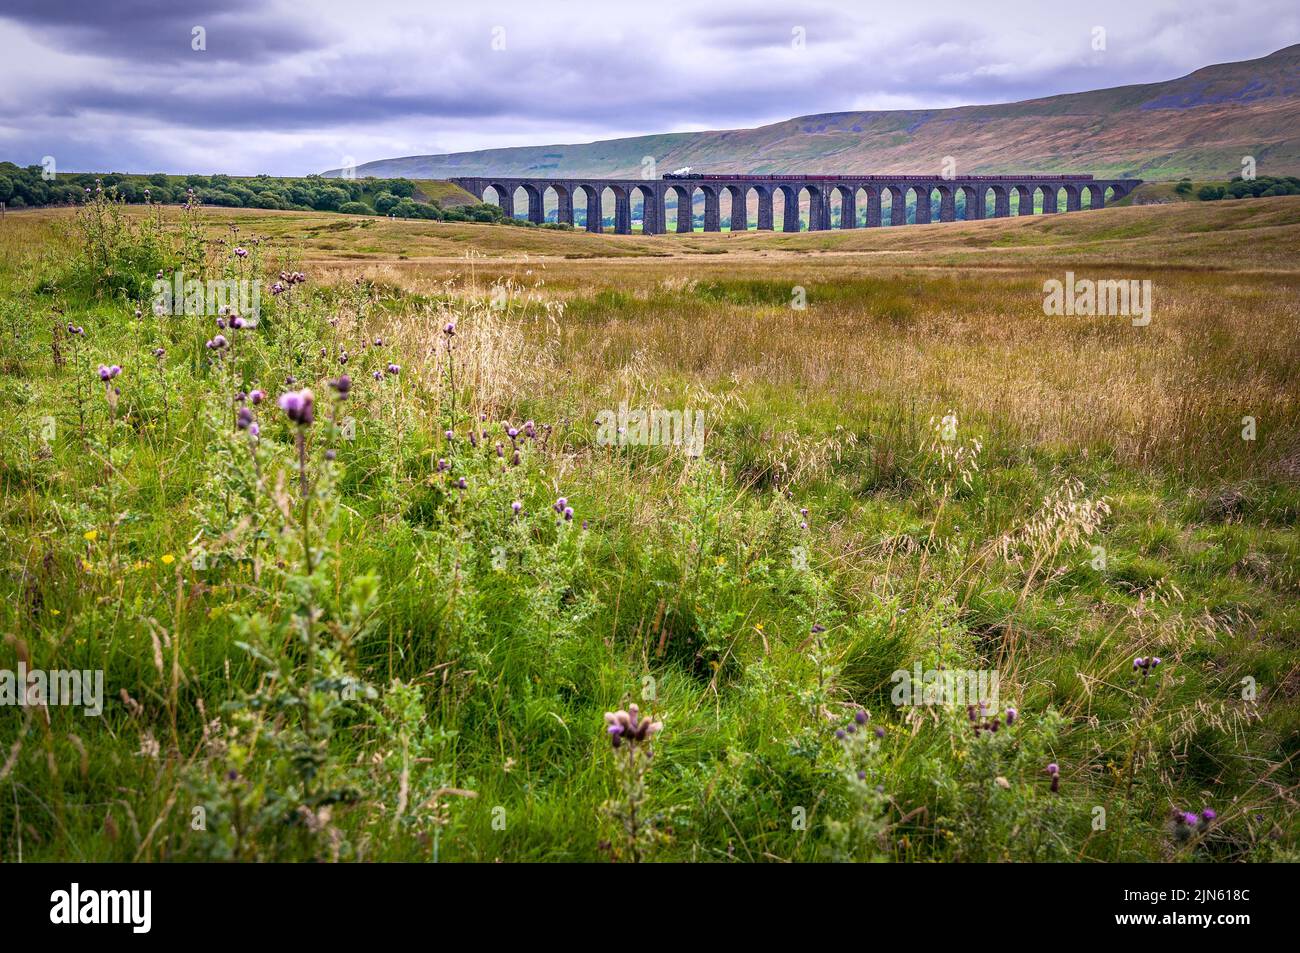 Ribblehead viaaduct on the Setlle to Carlsile line in Yorkshire with steam locomotive British India Line heading south. Stock Photo